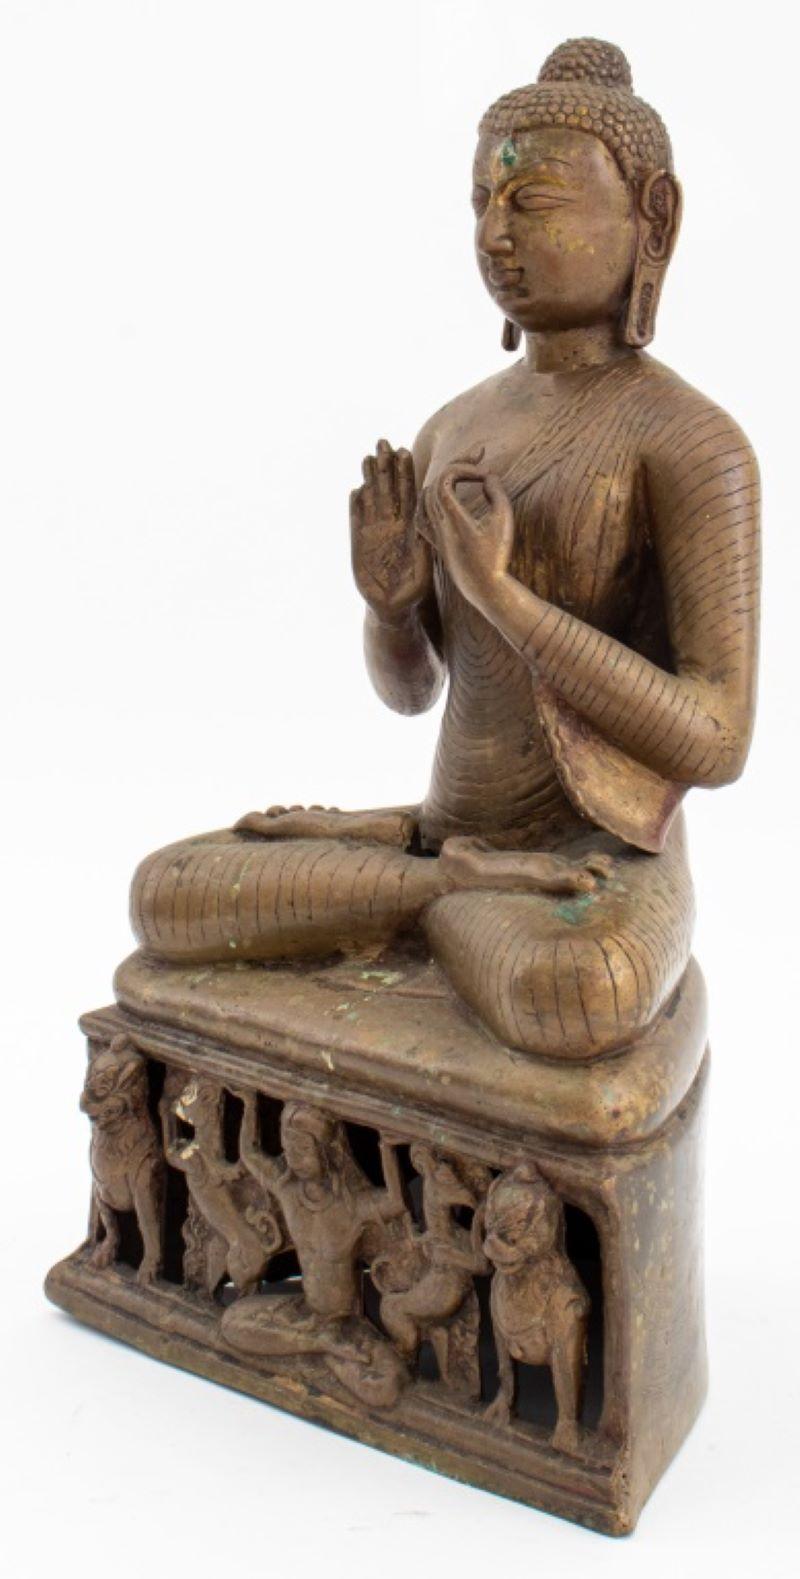 Buddha Shakyamuni or the Jina Buddha Vairochana sculpture in brass, likely Kashmiri, 19th century or later, depicting the Buddha in contemplation, on a reticulated plinth with a frieze depicting the Buddha with lions. 15.5